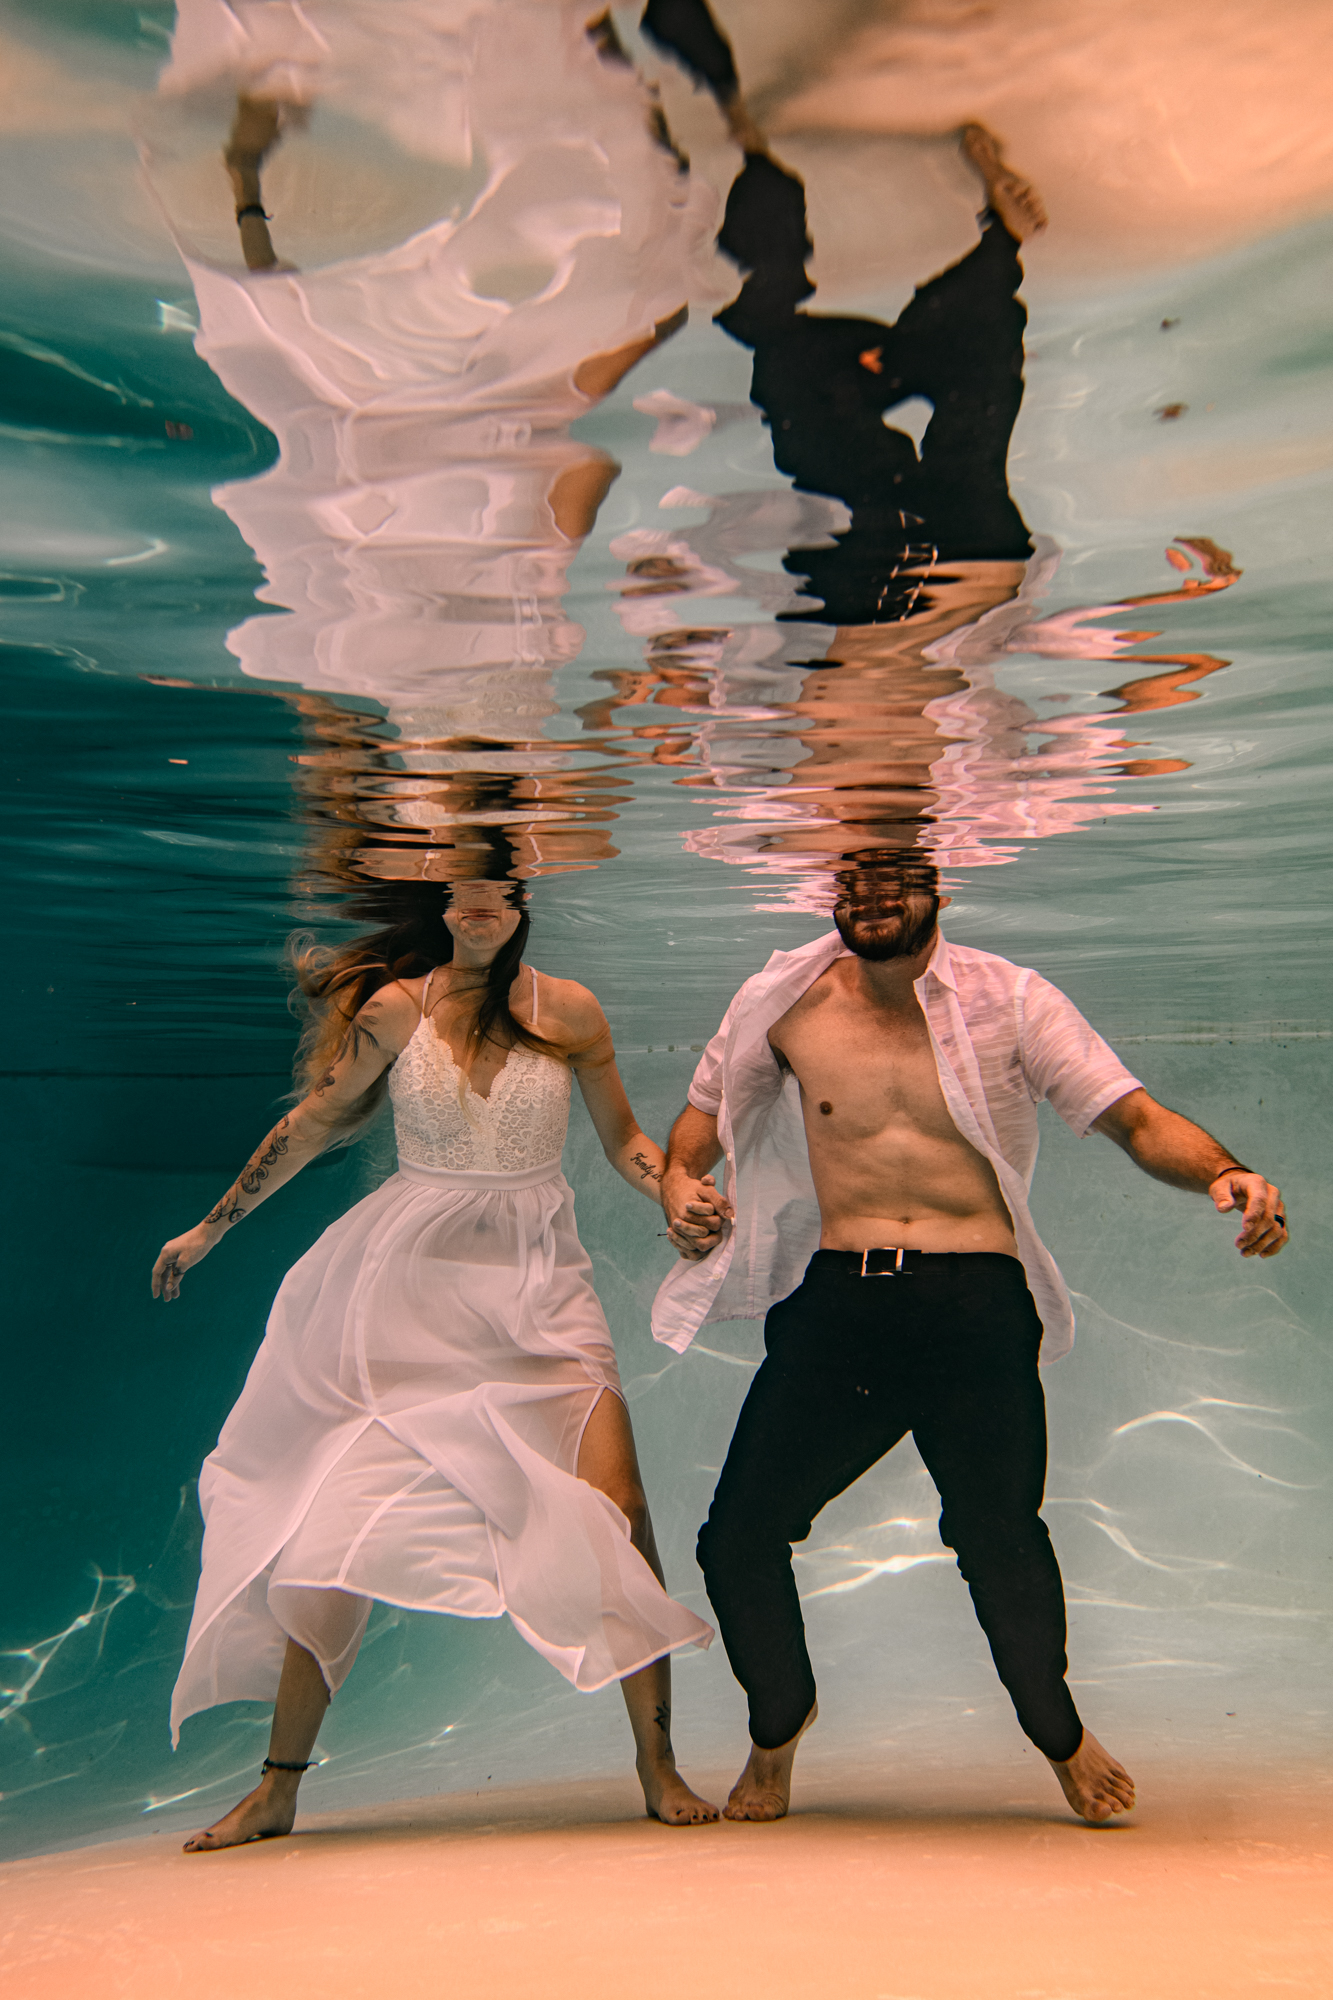 Chris Spicks Photography captures a creative and unique moment in Houston, featuring a bride and groom standing under water in their wedding dress.